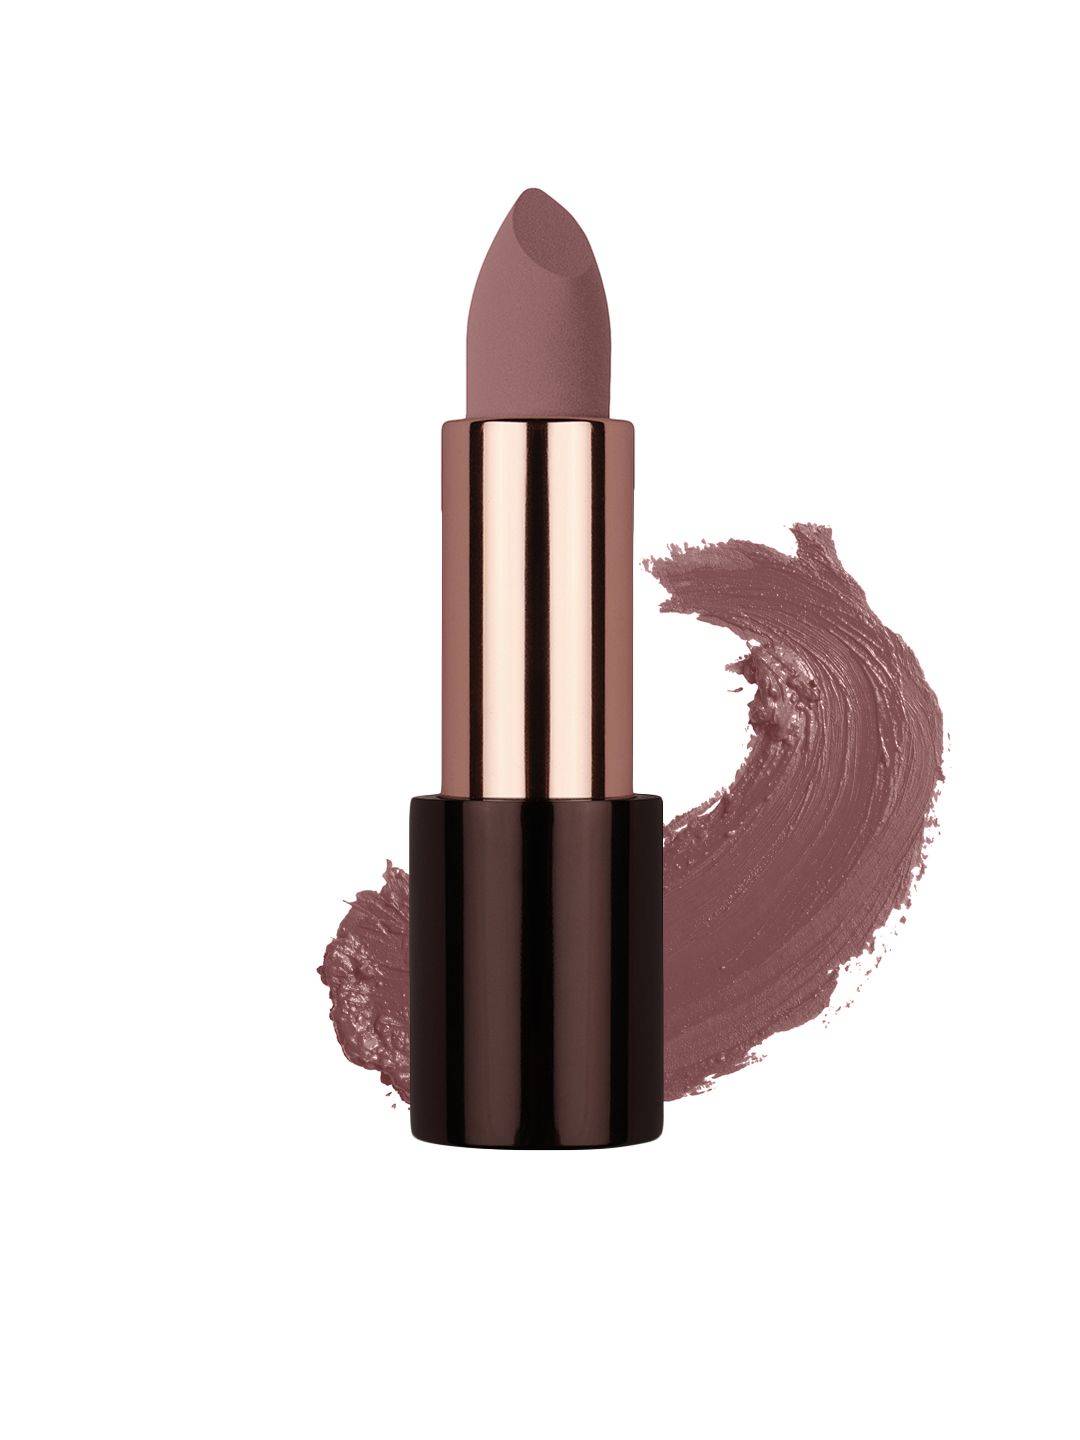 Colorbar Sinful Matte Lipcolor - Unspeakable 024 3.5 g Price in India